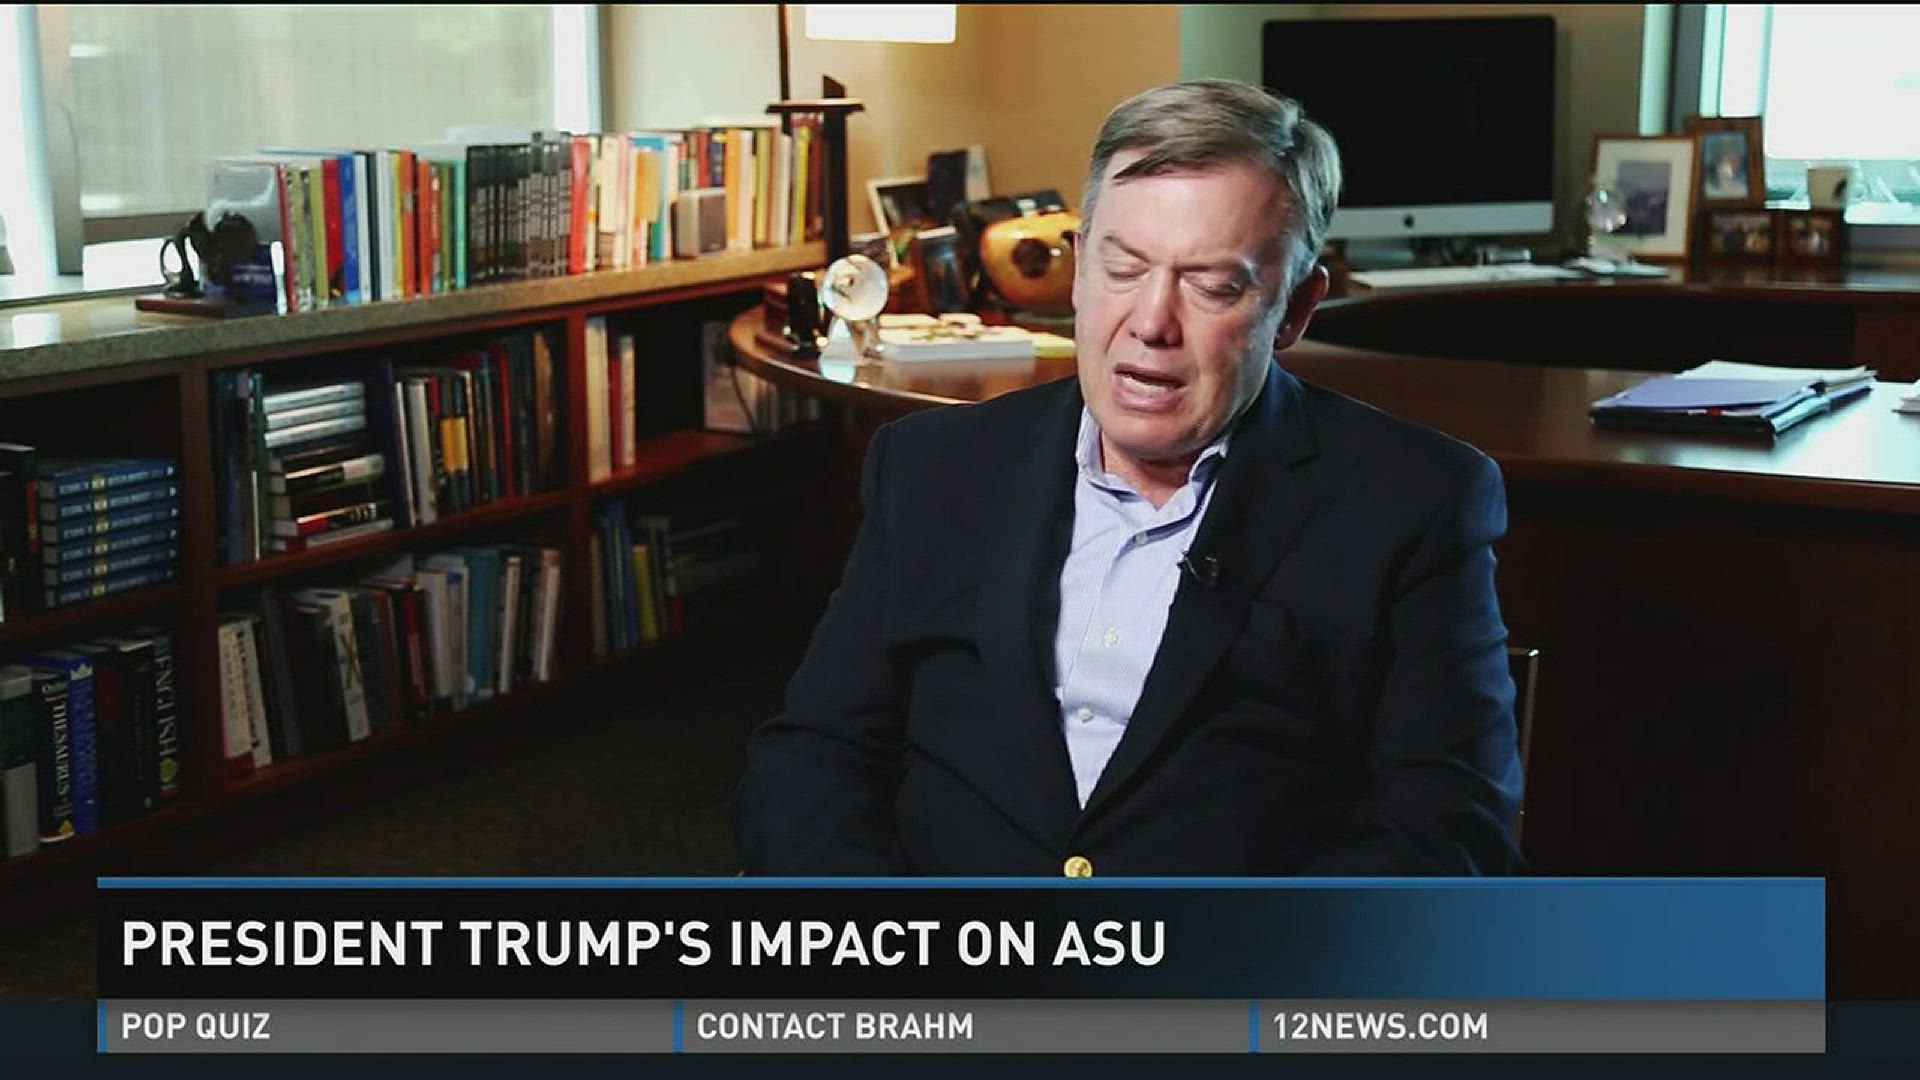 President Donald Trump is making several moves that affect ASU and the nation's universities: the Muslim travel ban and new leadership at the U.S. Department of Education stand out.